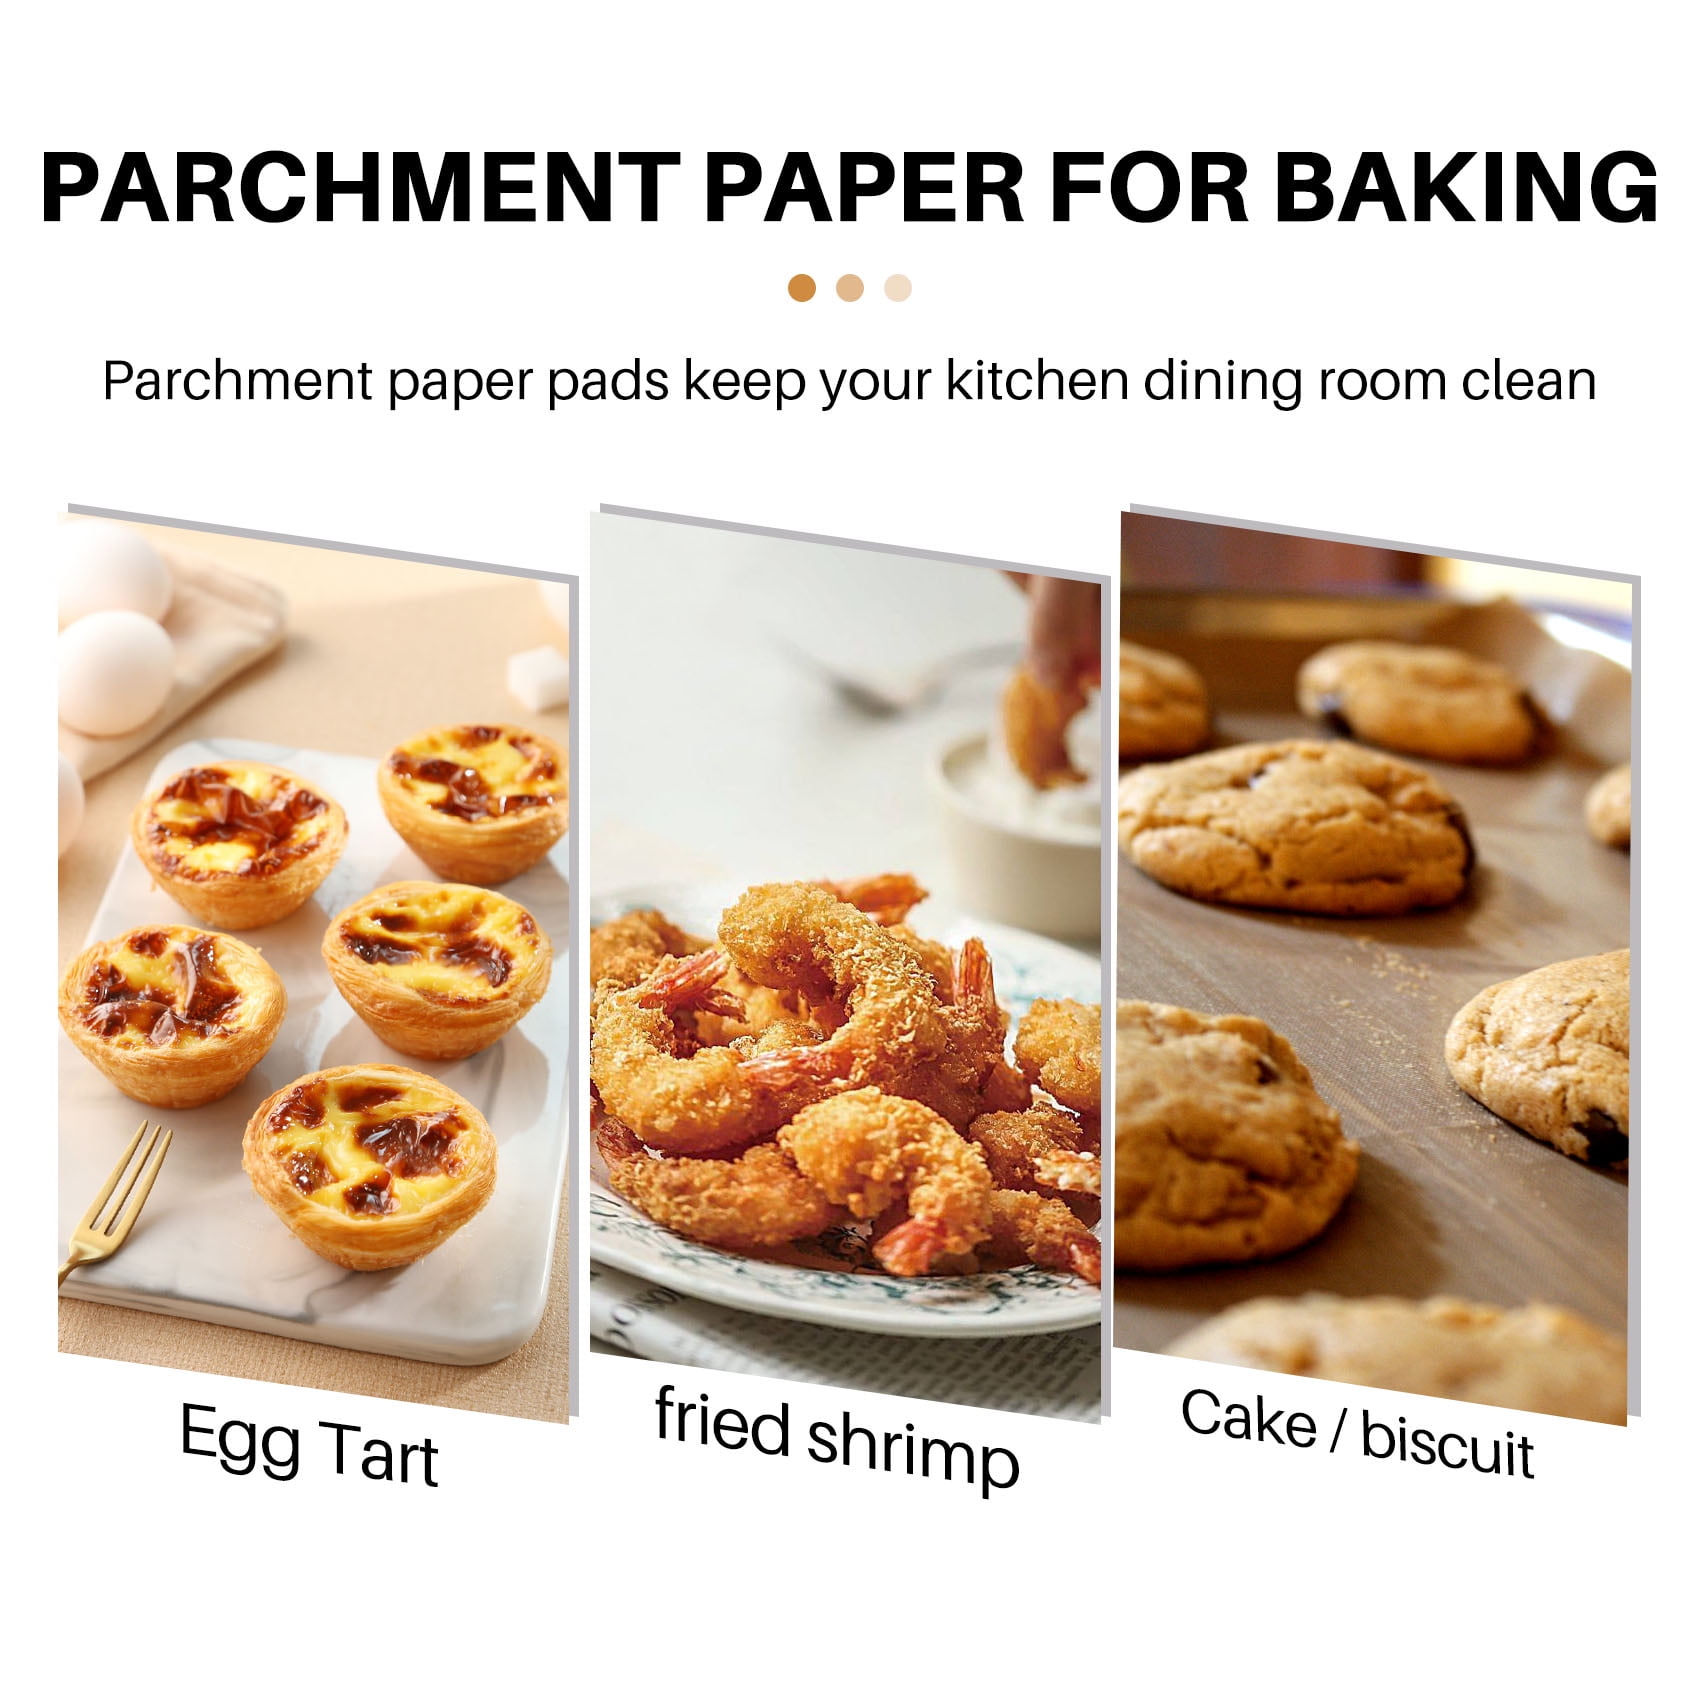 500 Pcs Unbleached Parchment Paper Baking Sheets, 4x4 Inches Non-Stick Precut Baking Parchment, Perfect for Wrapping, Size: 10, Brown